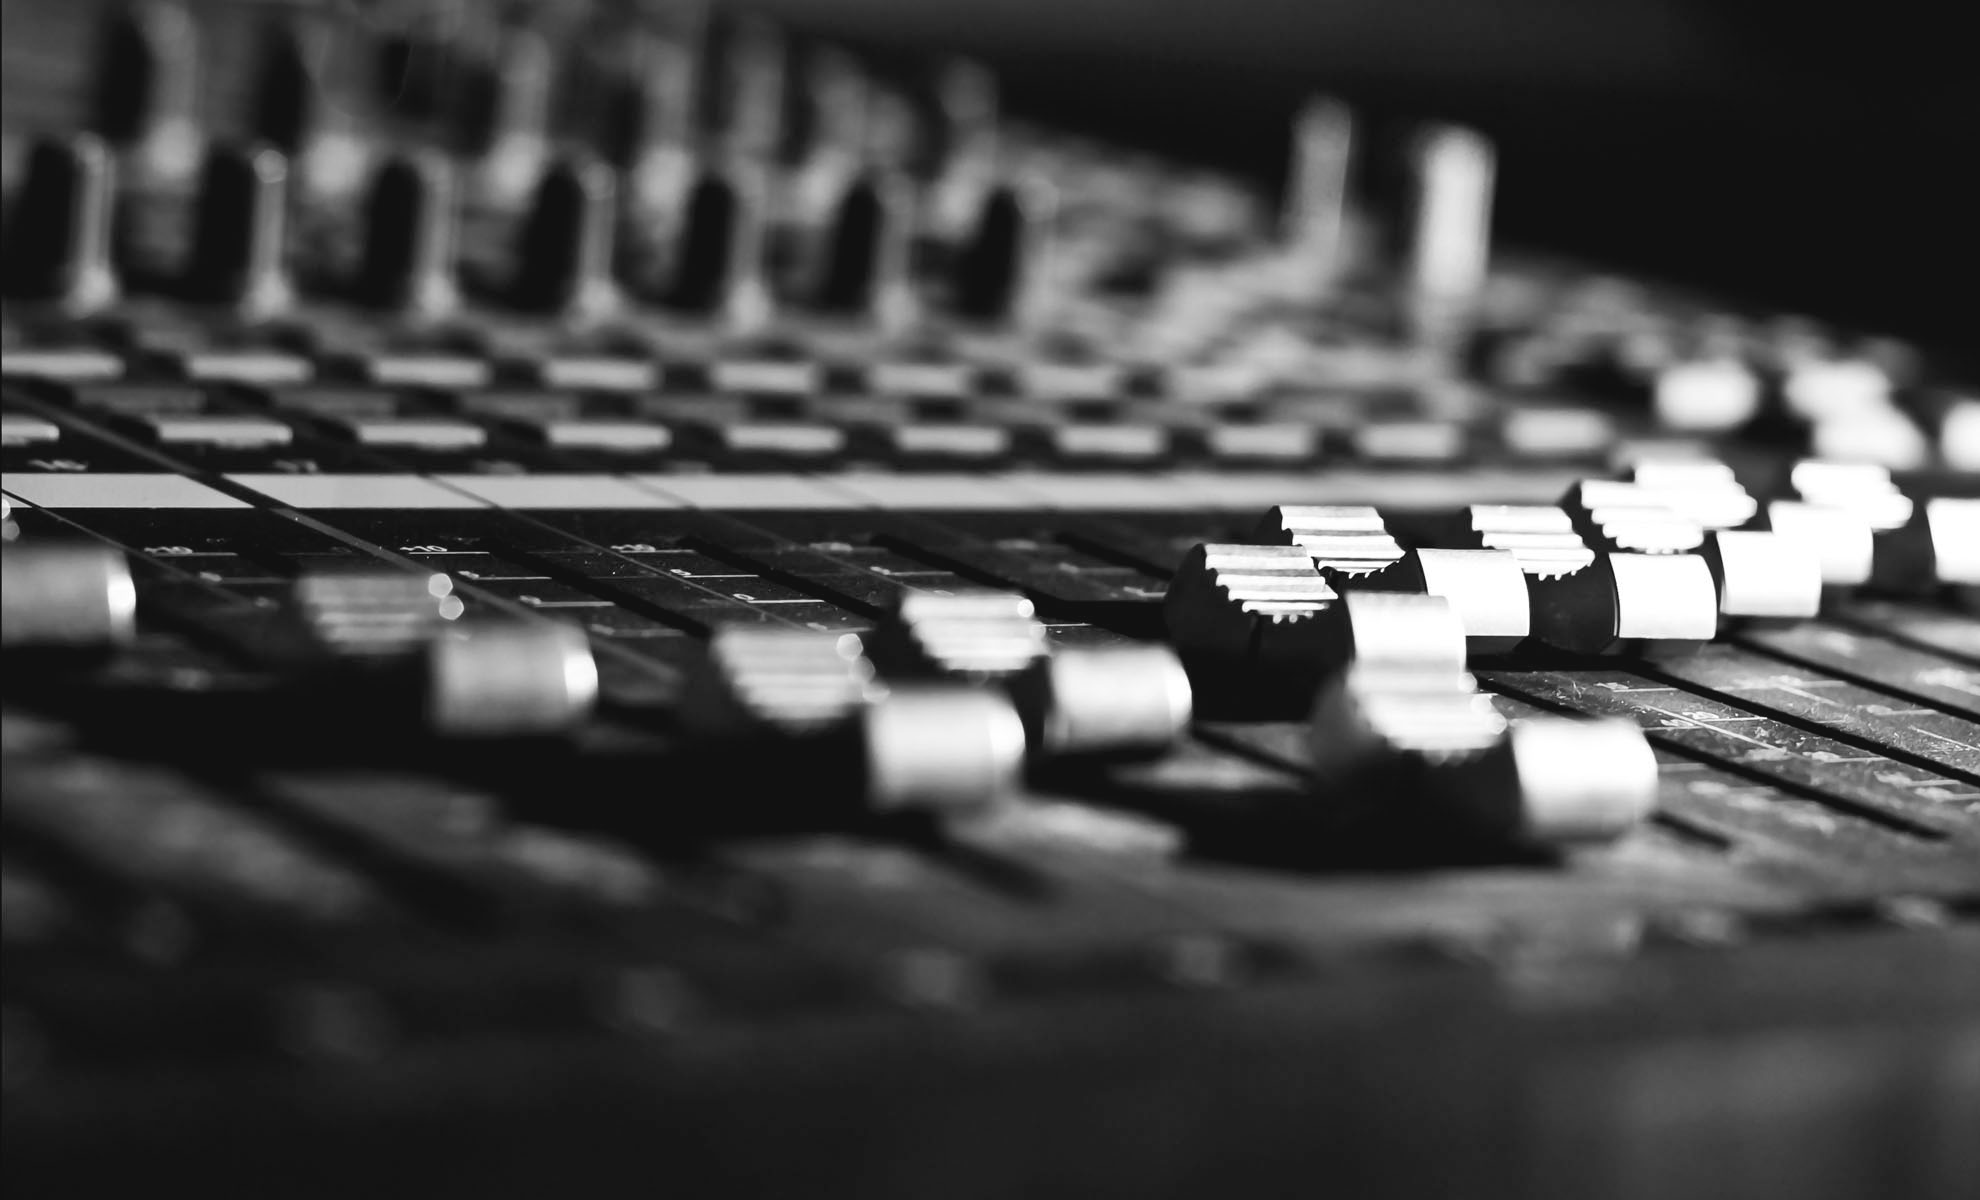 A picture of a audio mixing console.